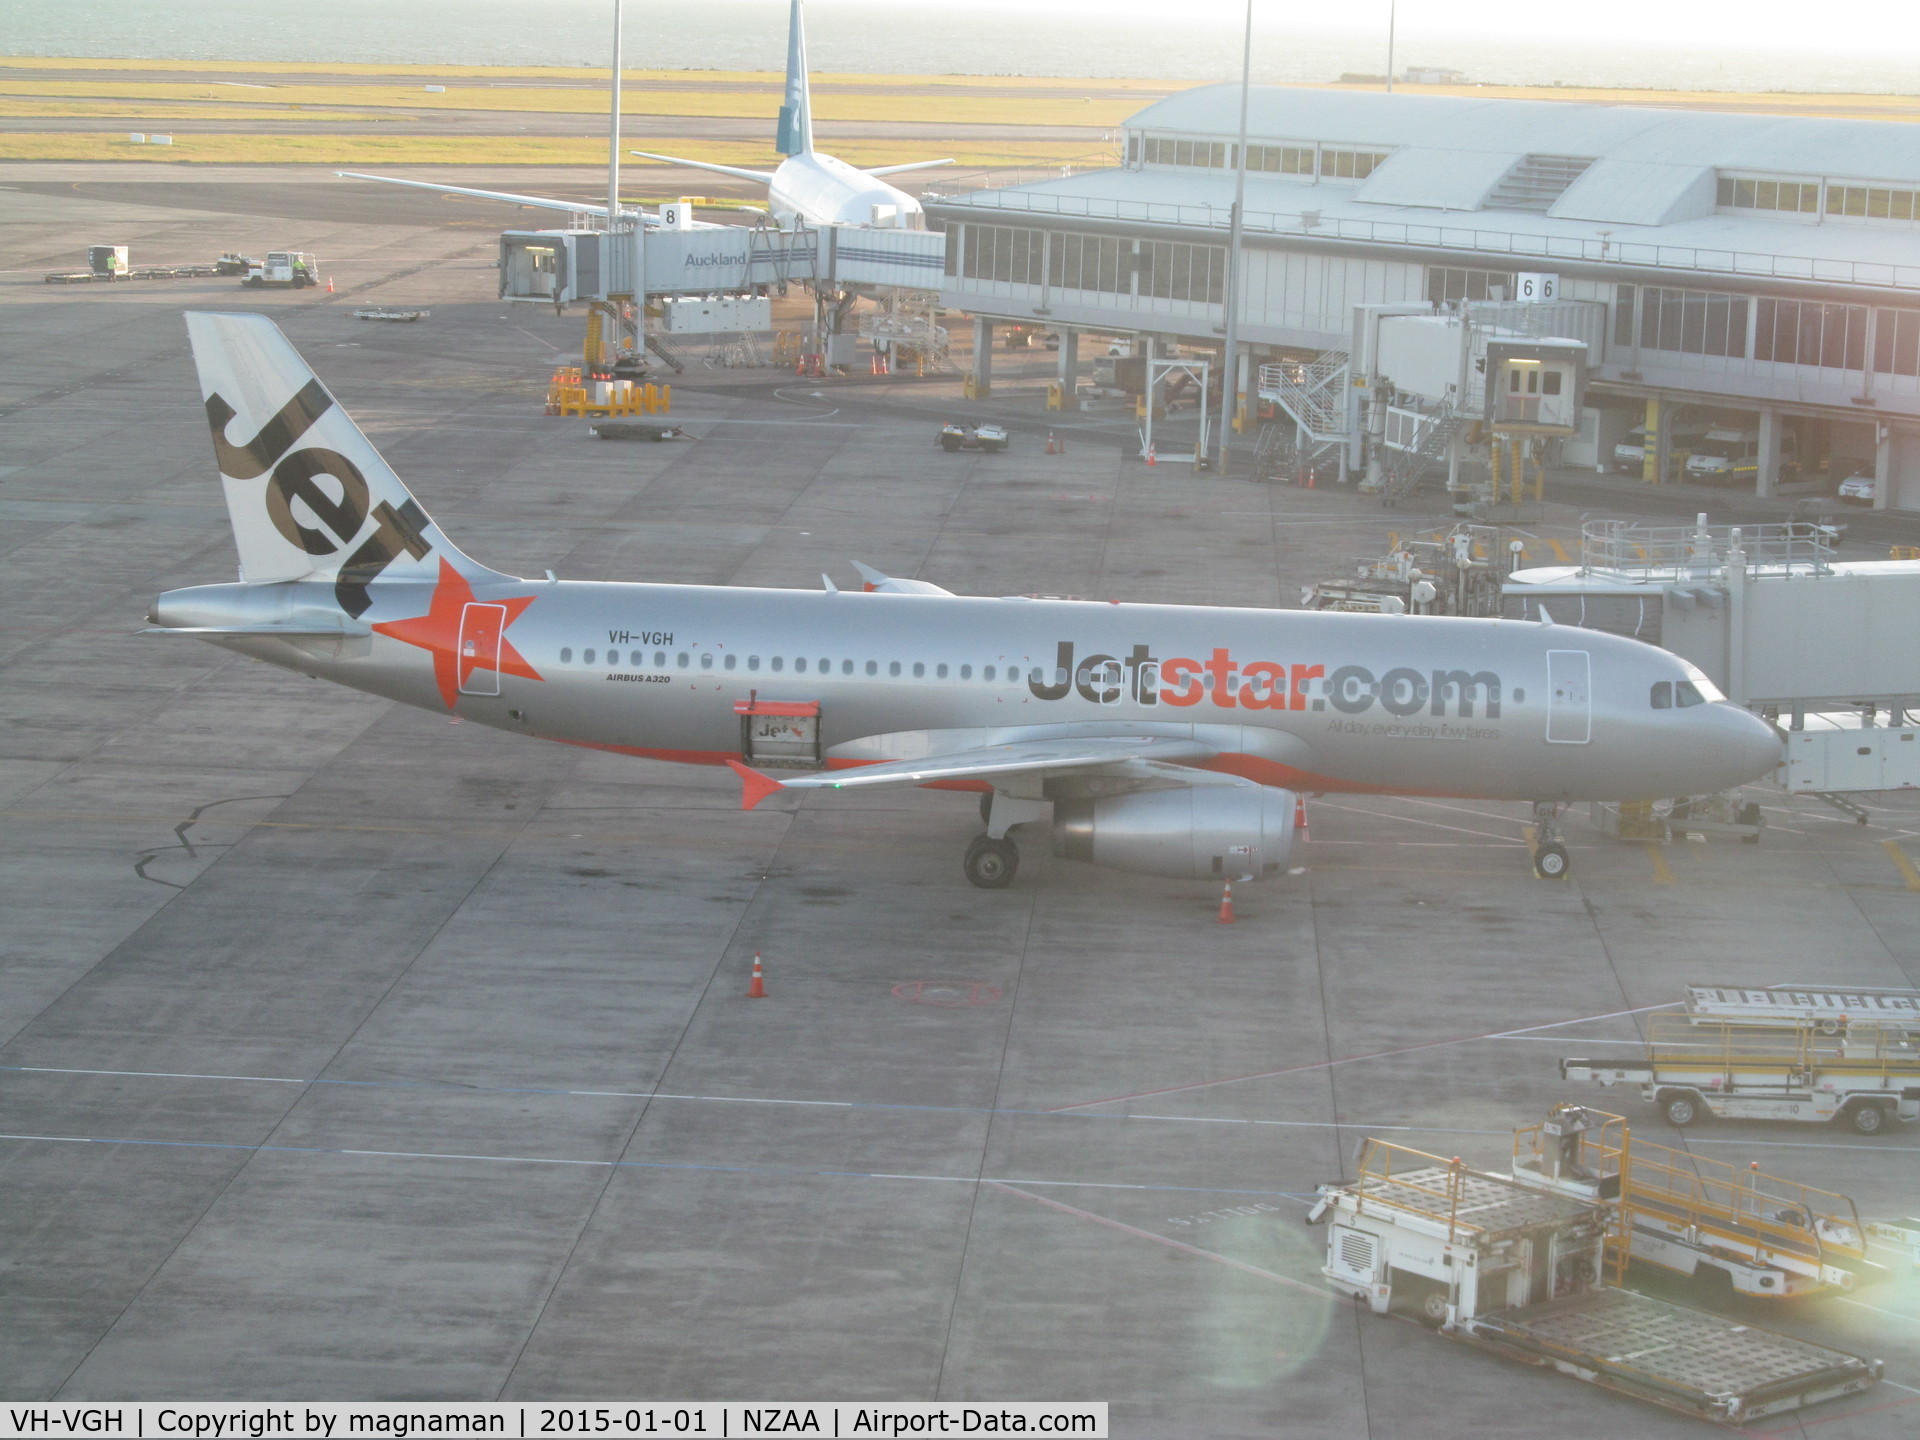 VH-VGH, 2010 Airbus A320-232 C/N 4495, on apron - strong sun and glass in viewing area not helping!